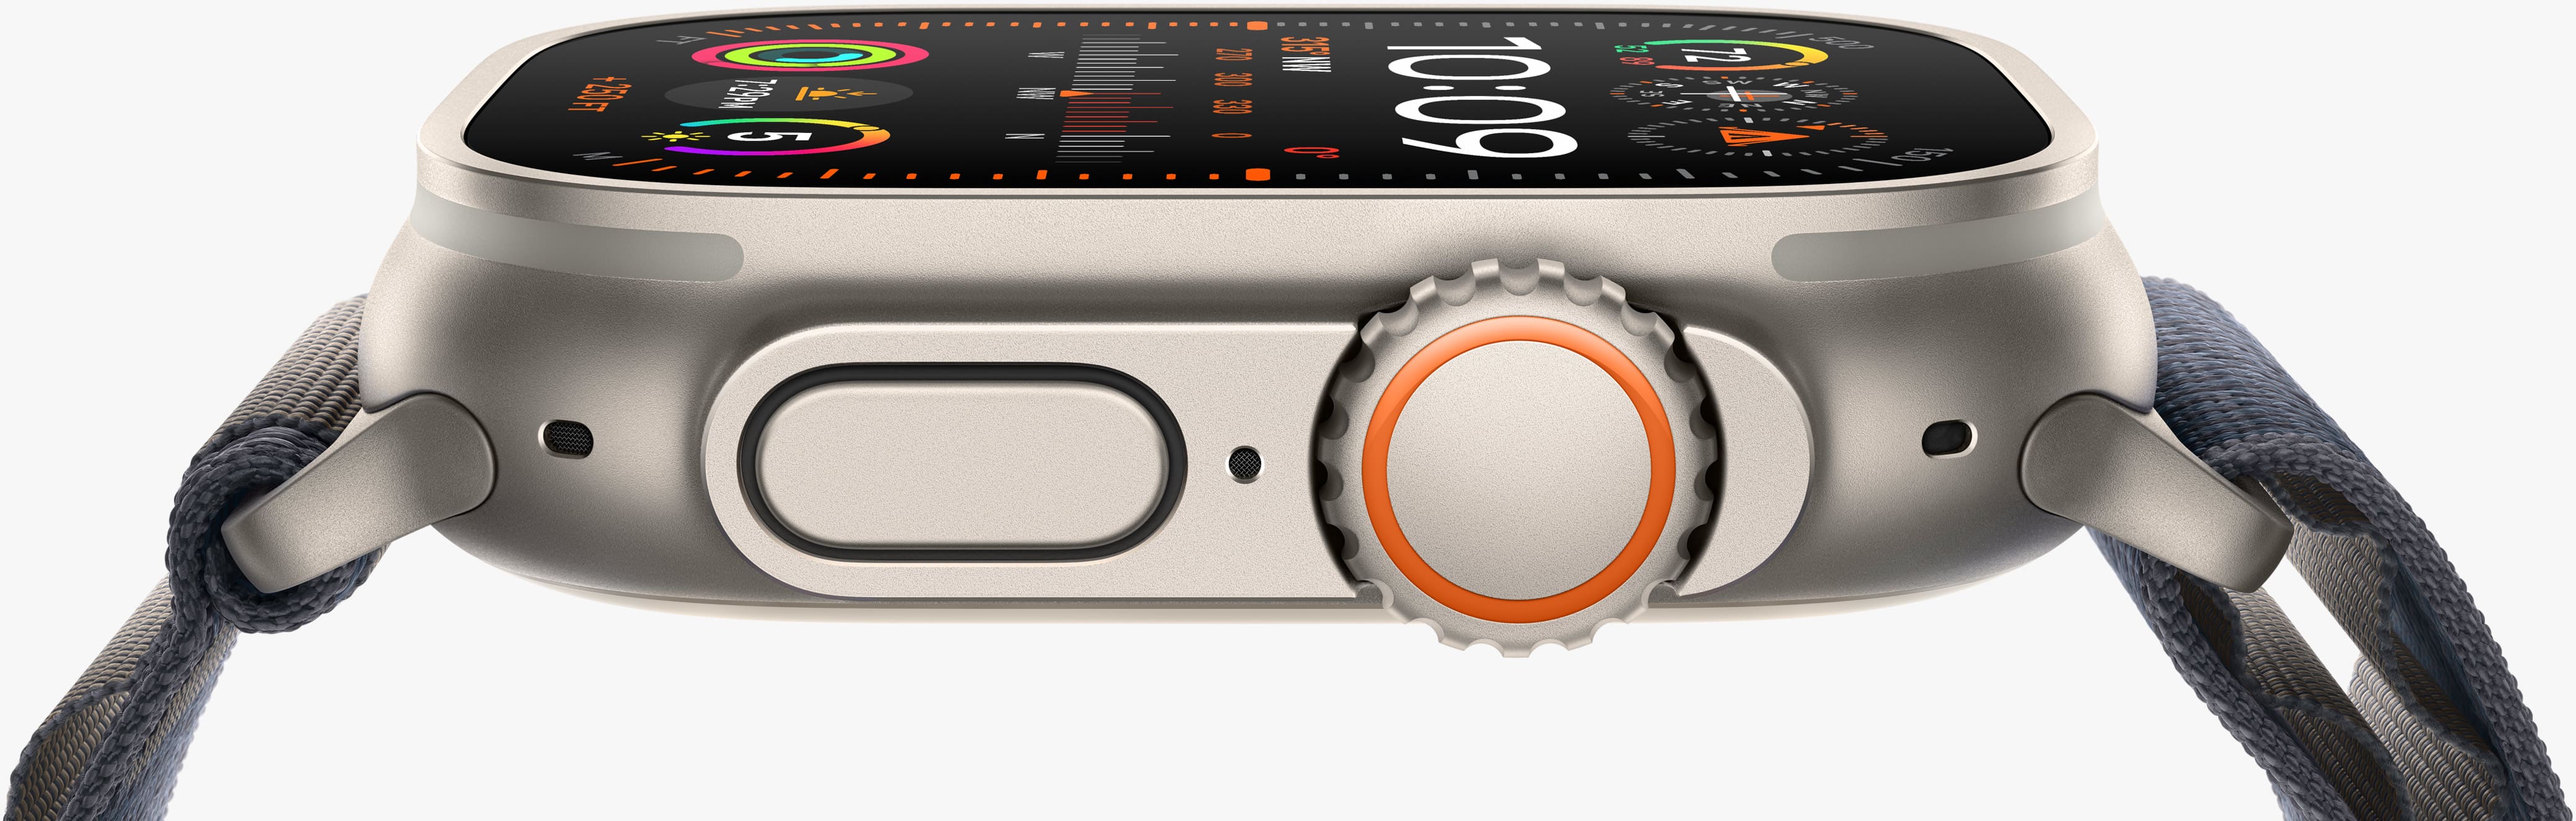 applewatchultra